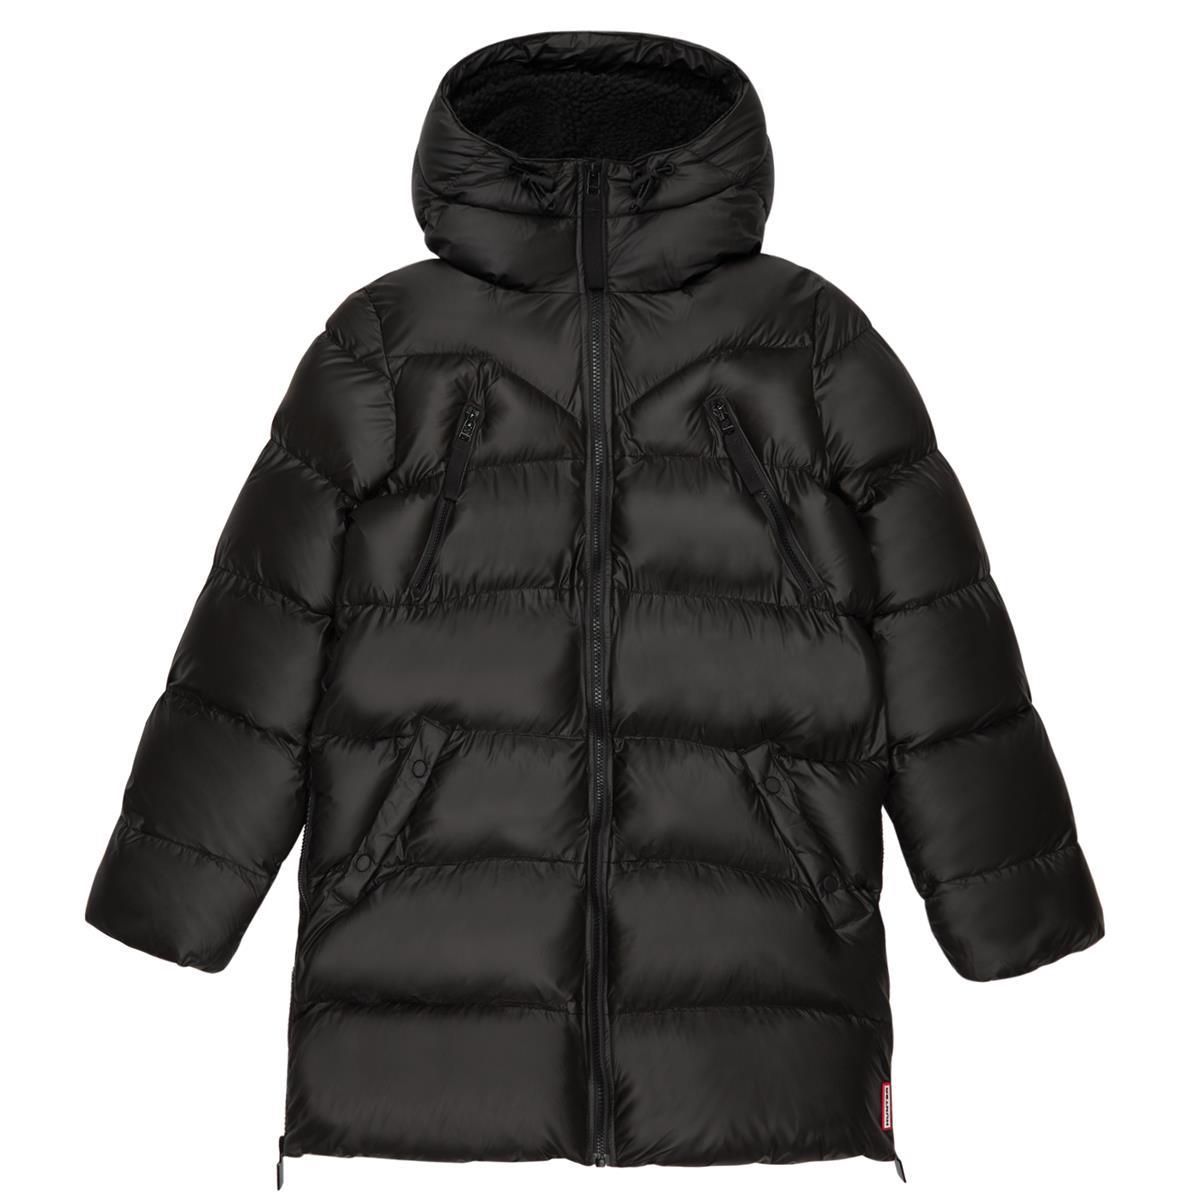 What type of insulation is used in the Hunter puffer jacket?